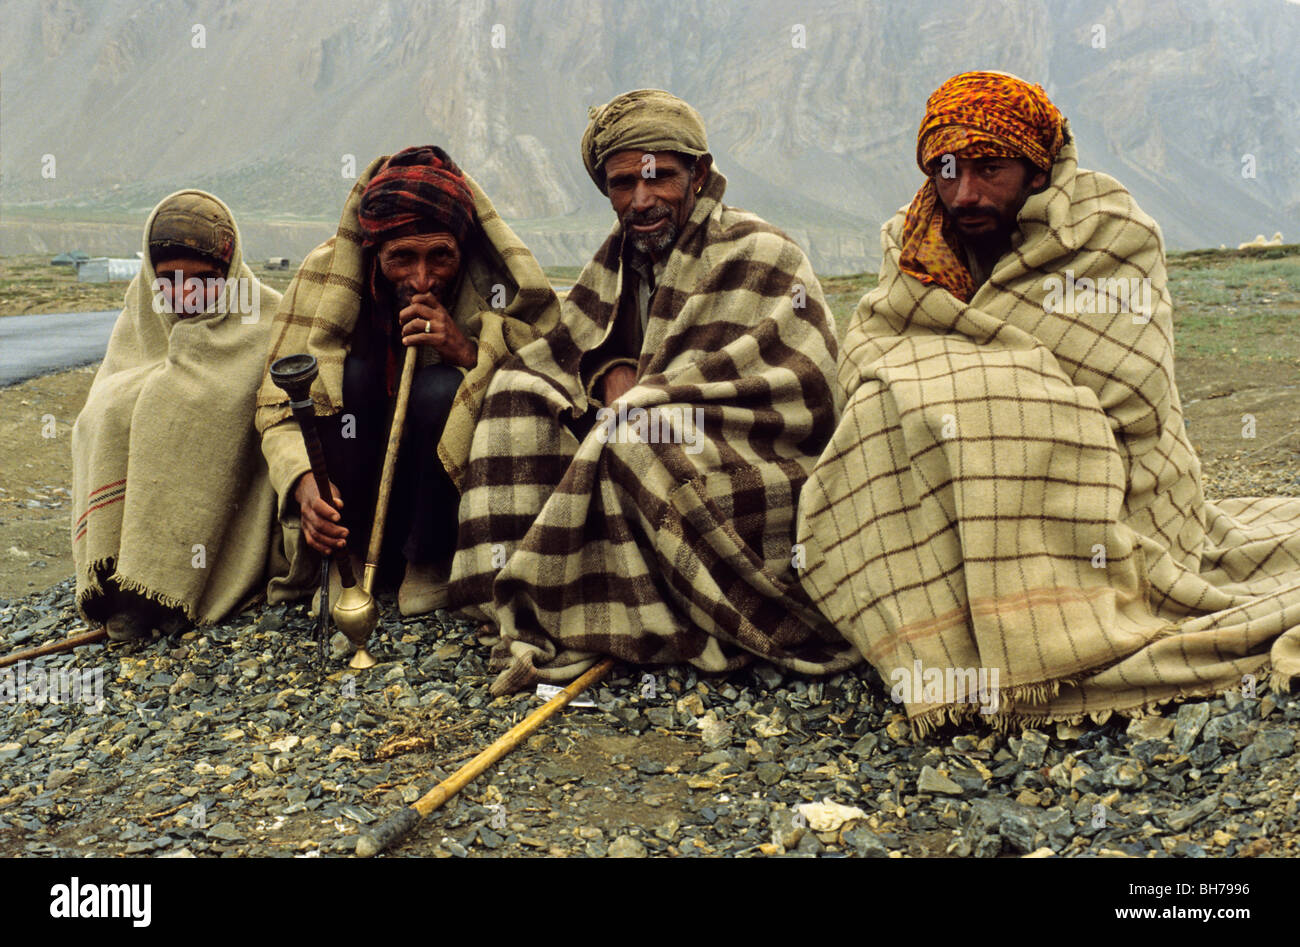 Sheperds from Lahoul, a northern province of India. Stock Photo